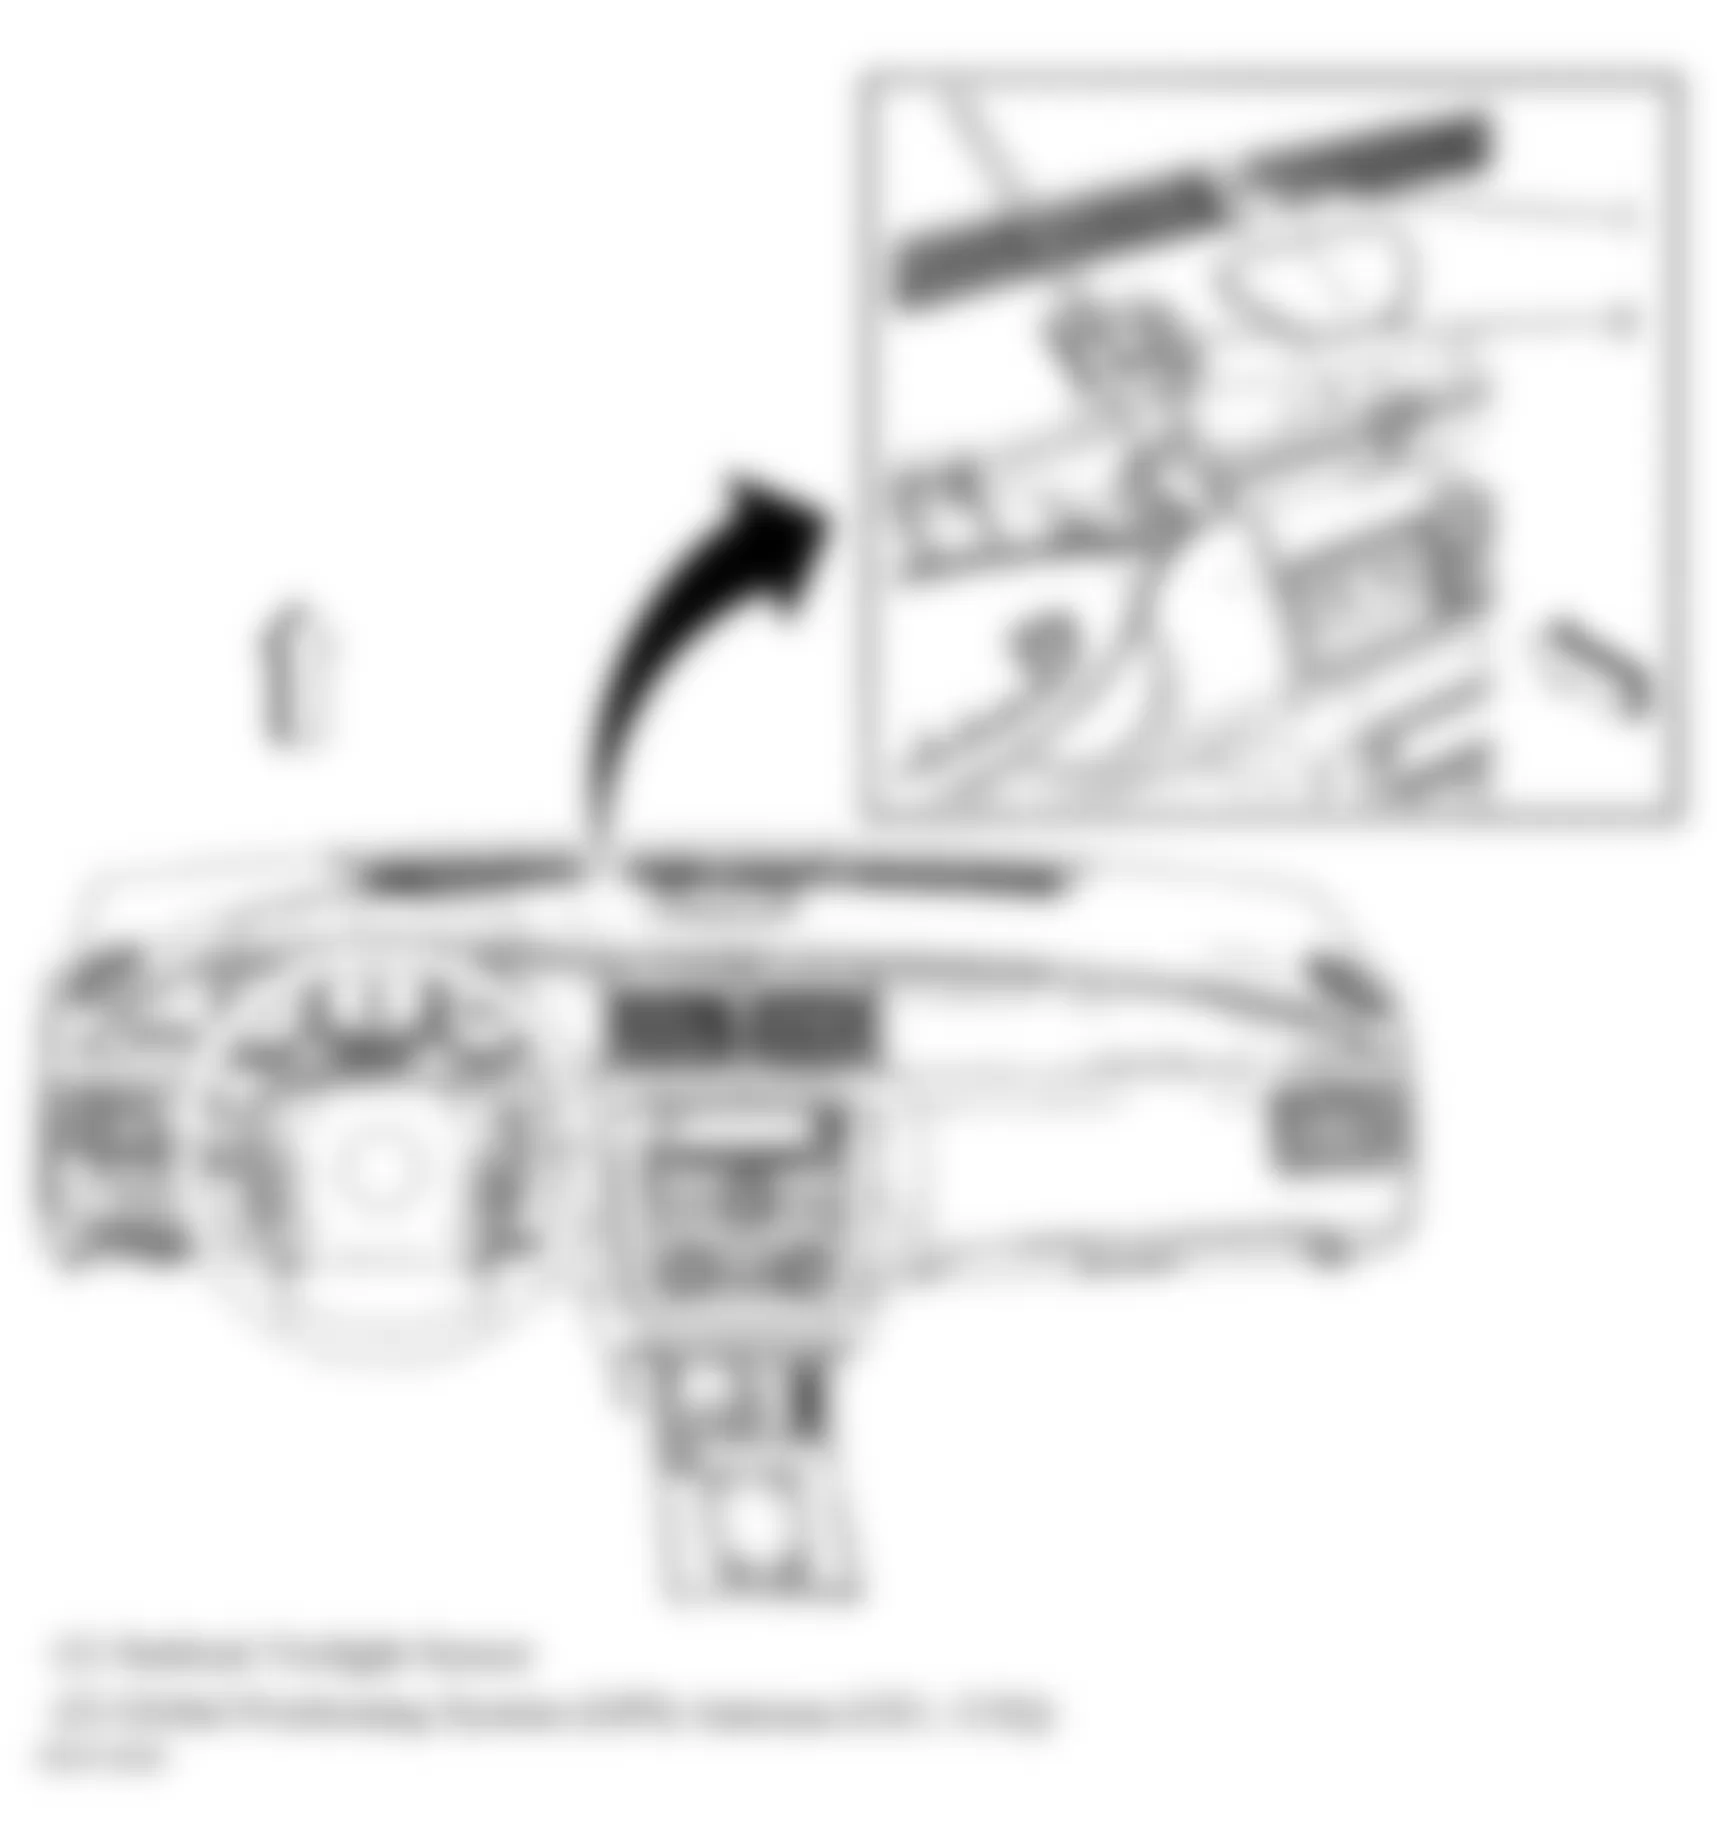 Buick Lucerne Super 2008 - Component Locations -  Top Center Of Dash